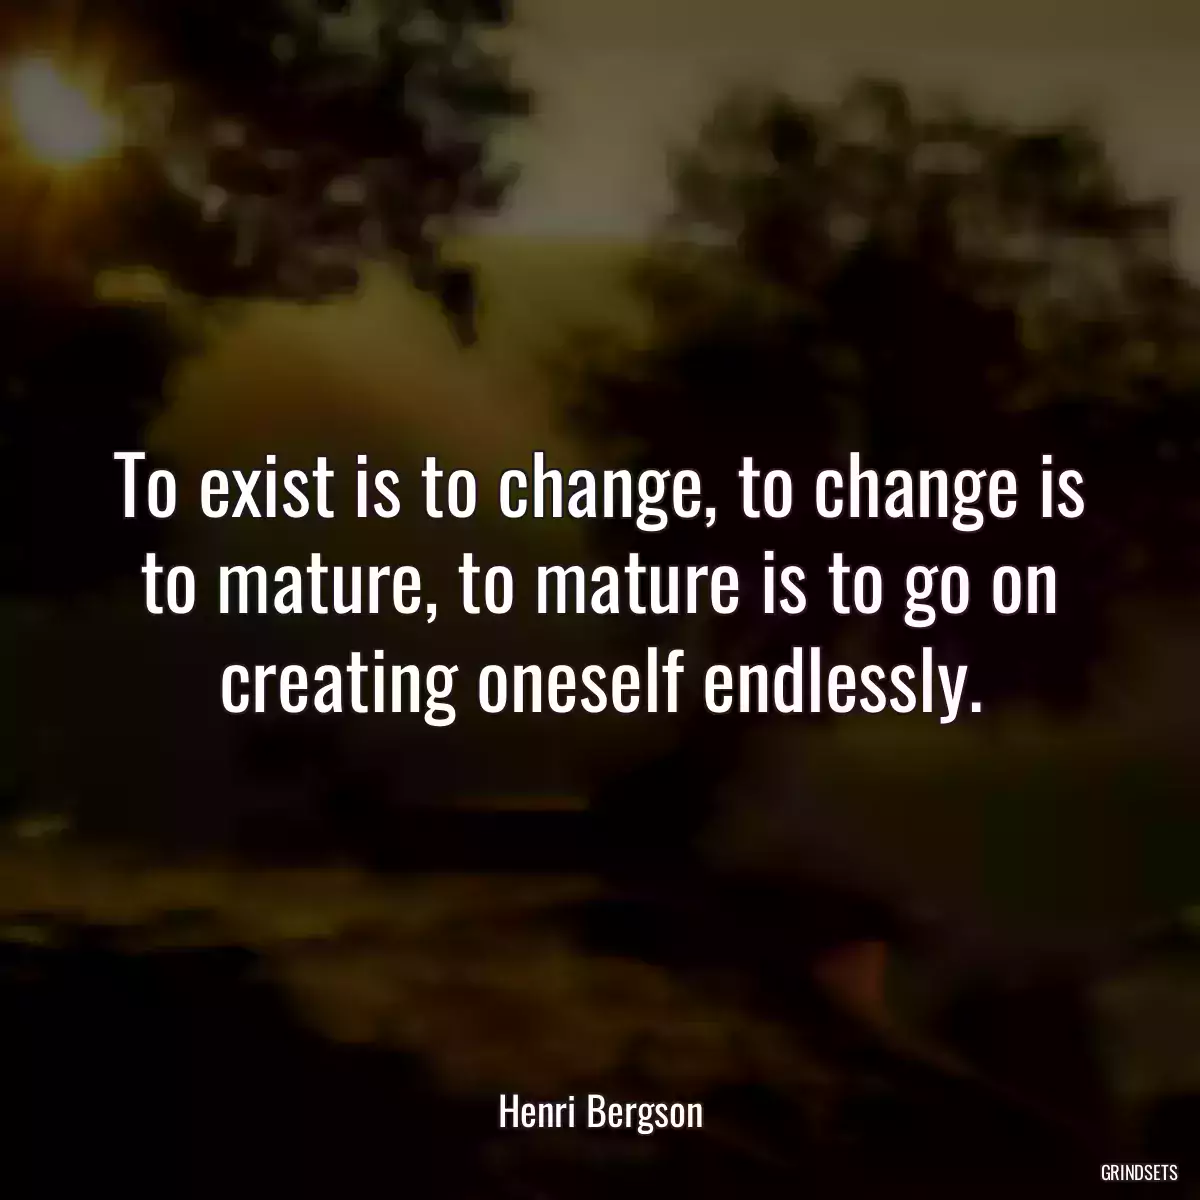 To exist is to change, to change is to mature, to mature is to go on creating oneself endlessly.